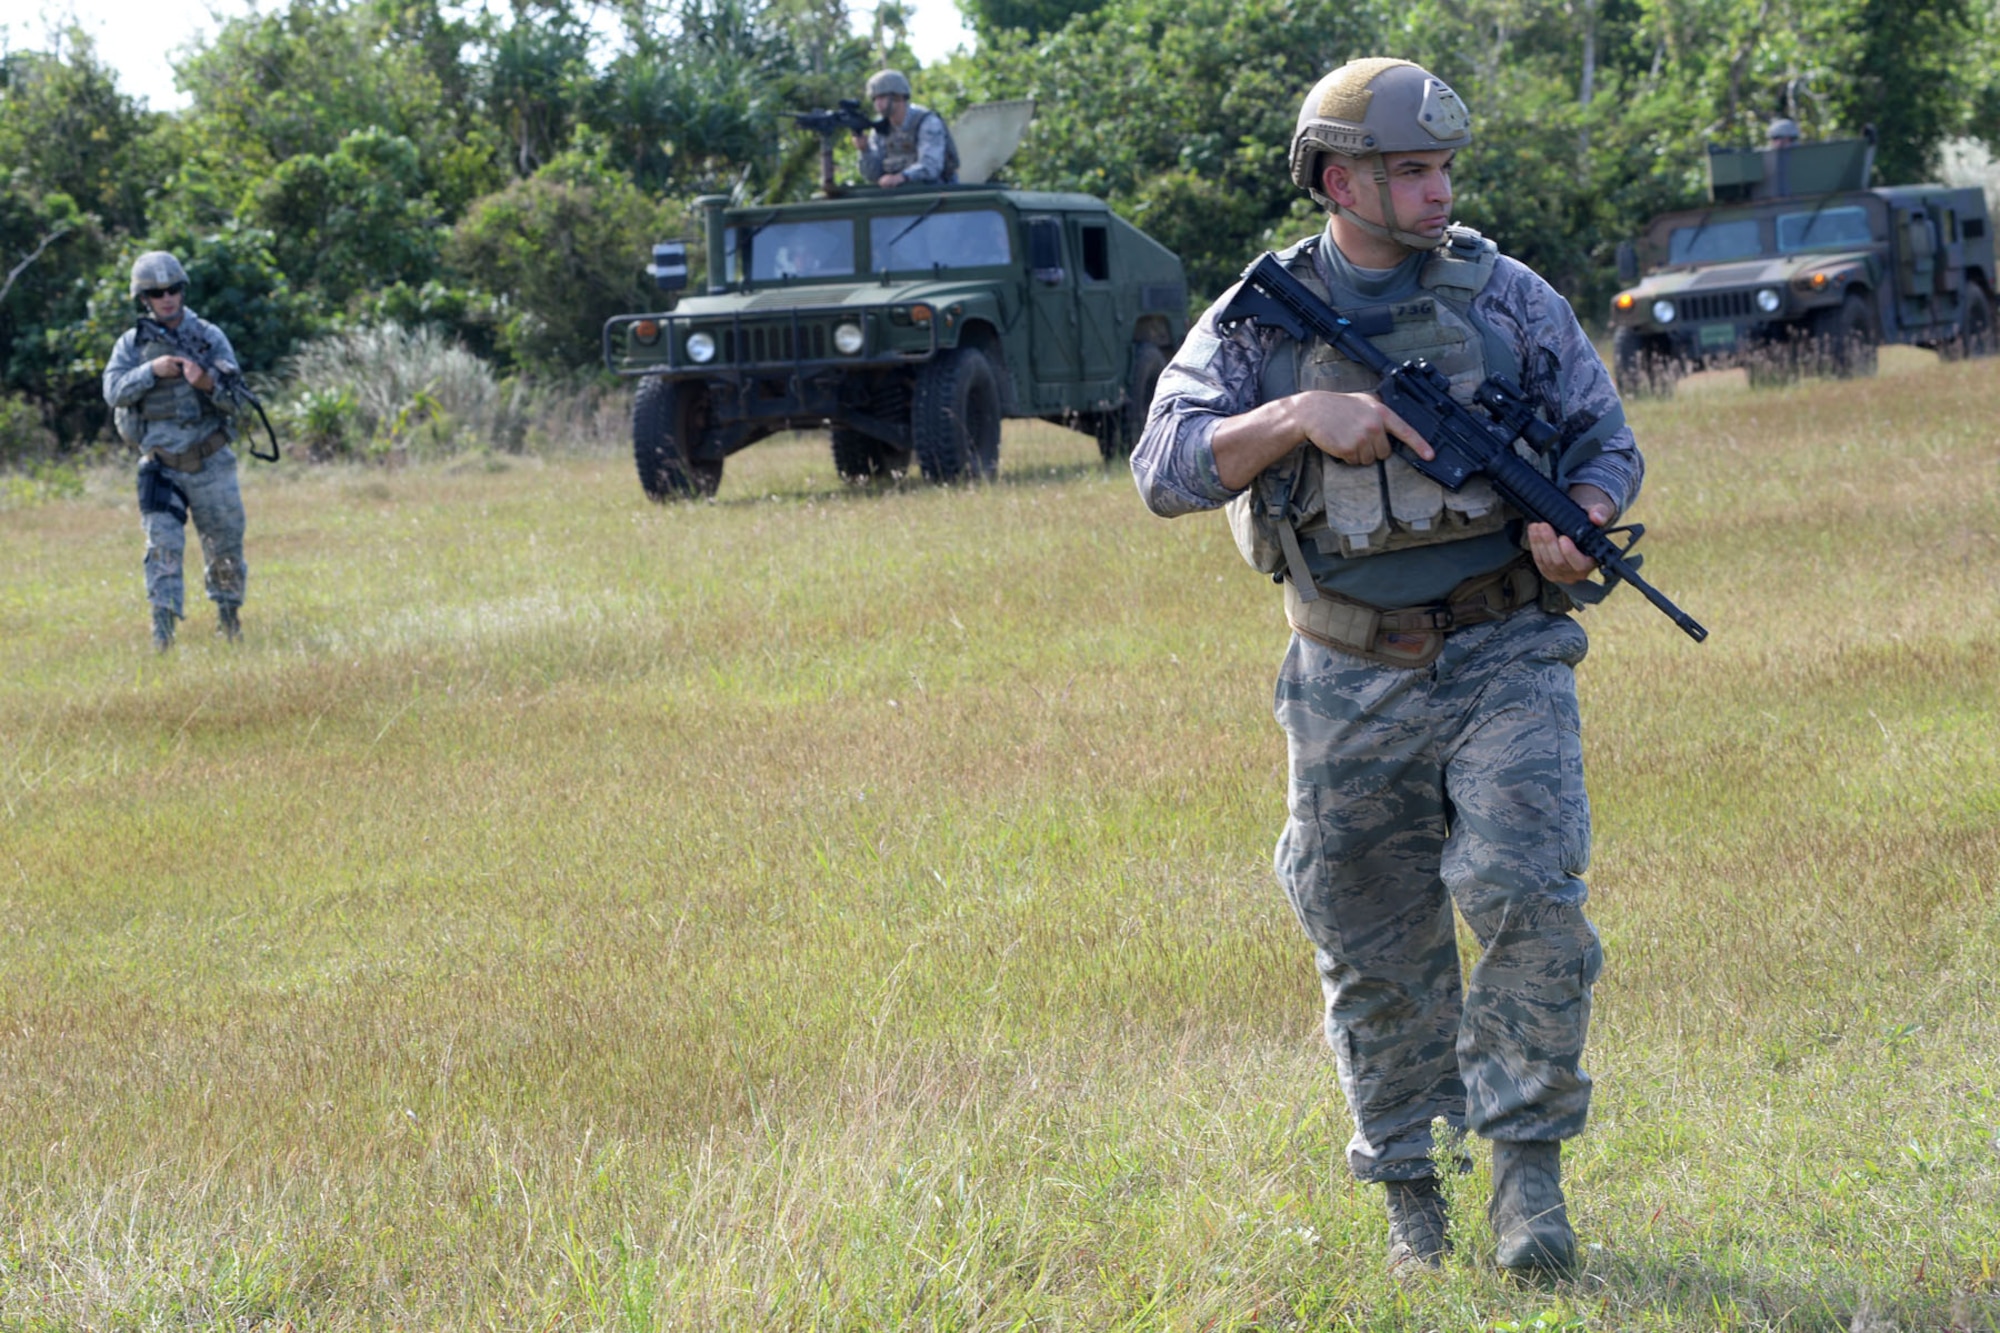 Staff Sgt. Robert Keefe, 736th Security Forces Squadron NCO in charge of training, performs an unexploded ordnance sweep Dec. 30, 2015, during a training exercise at Andersen Air Force Base, Guam.  On Oct. 16, 2015, Keefe graduated from the U.S. Army’s Ranger School. (U.S. Air Force photo/Senior Airman Joshua Smoot)